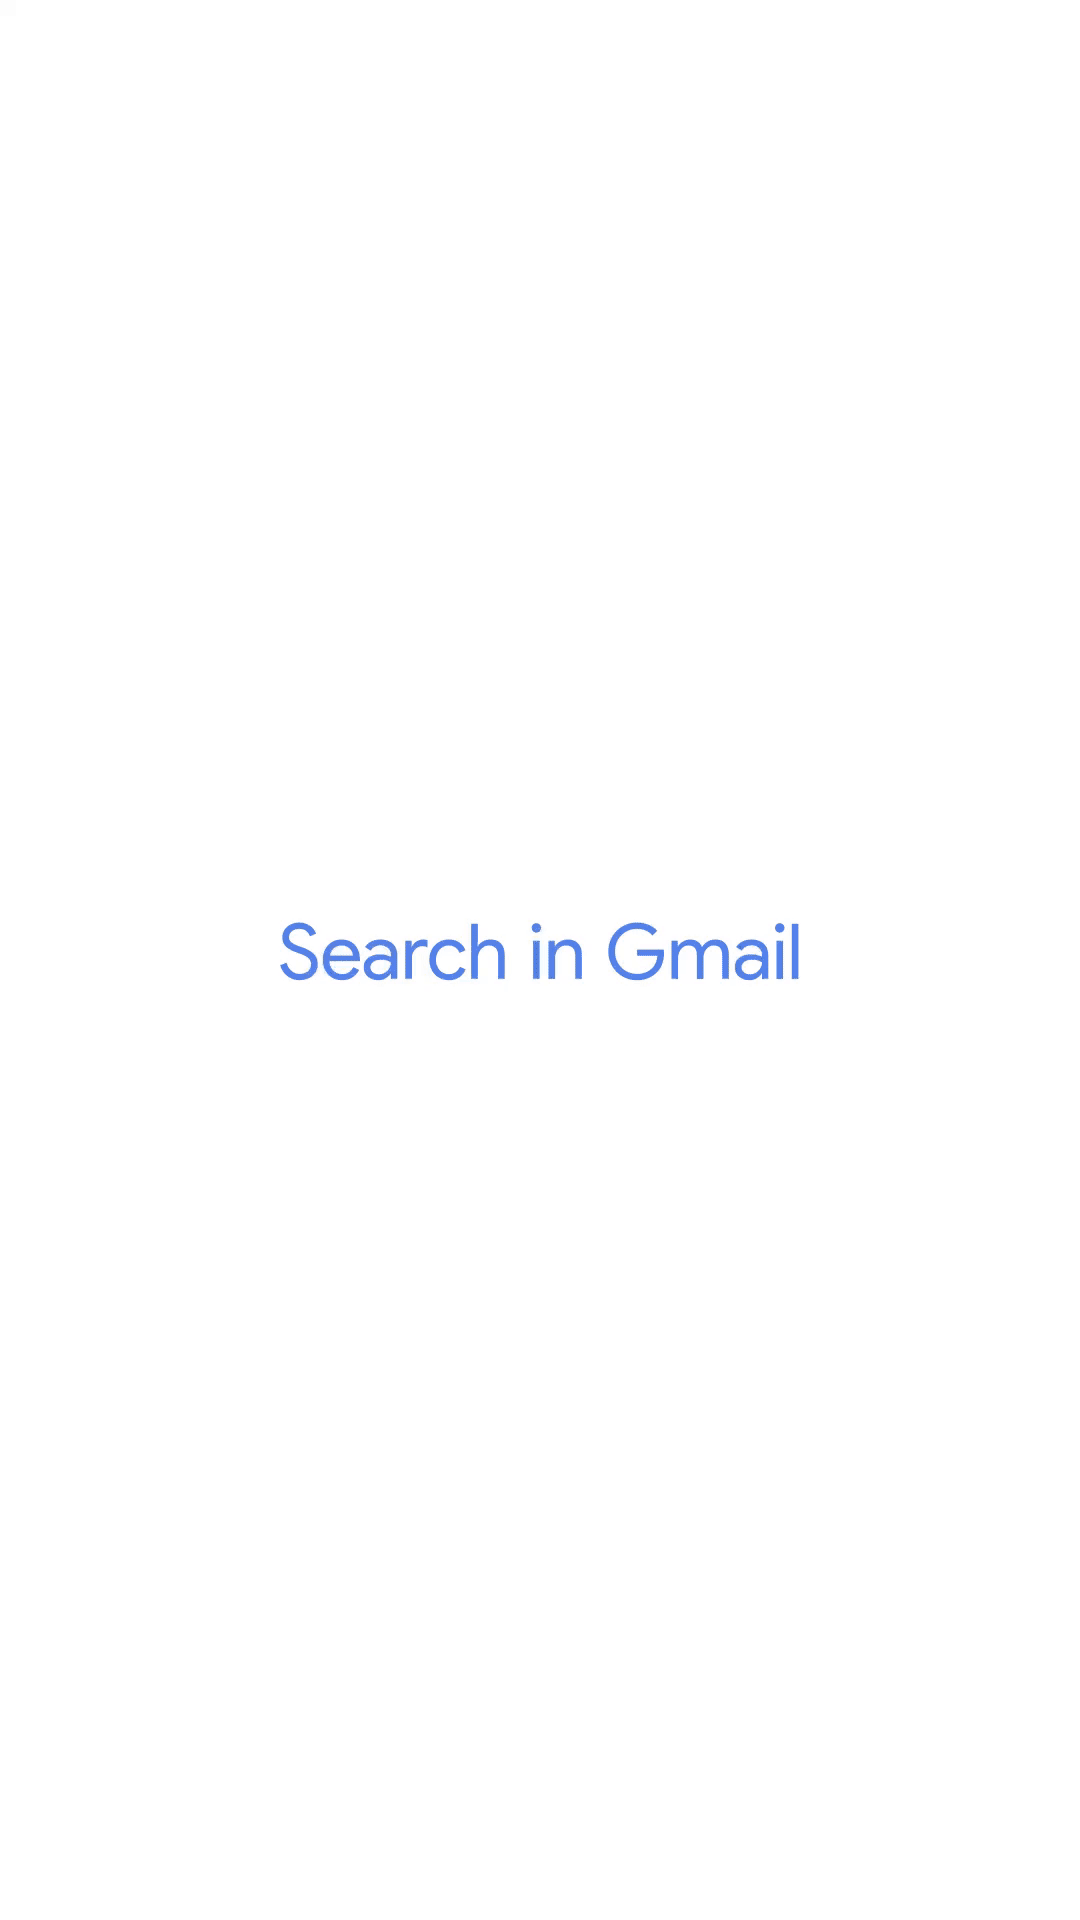 An illustration of searching on Gmail on iOS